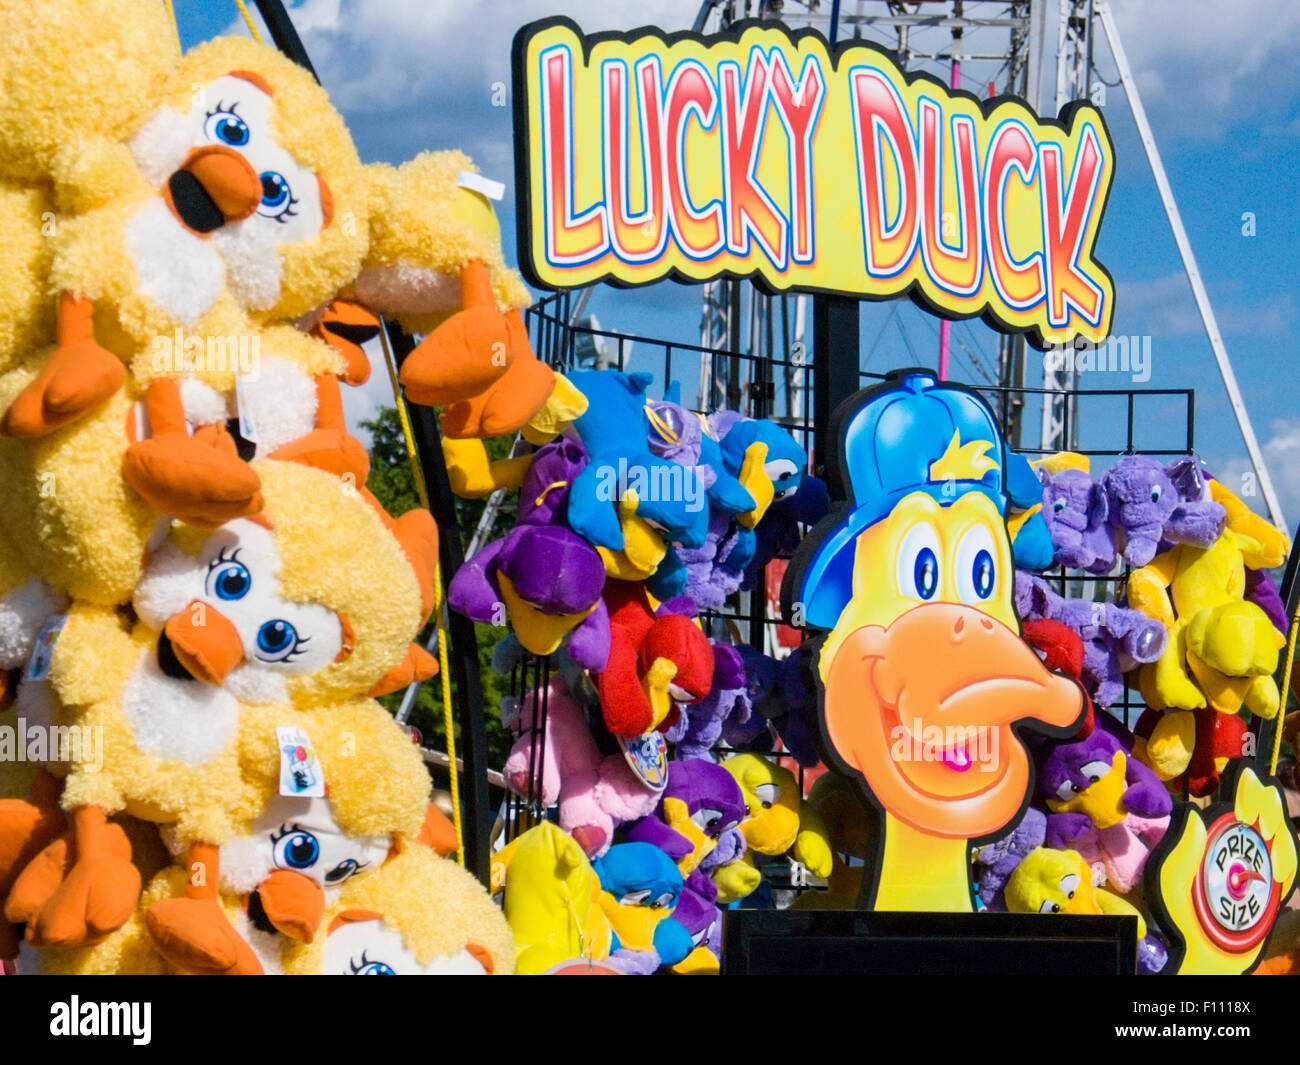 https://c8.alamy.com/comp/F1118X/lucky-duck-carnival-game-prizes-F1118X.jpg